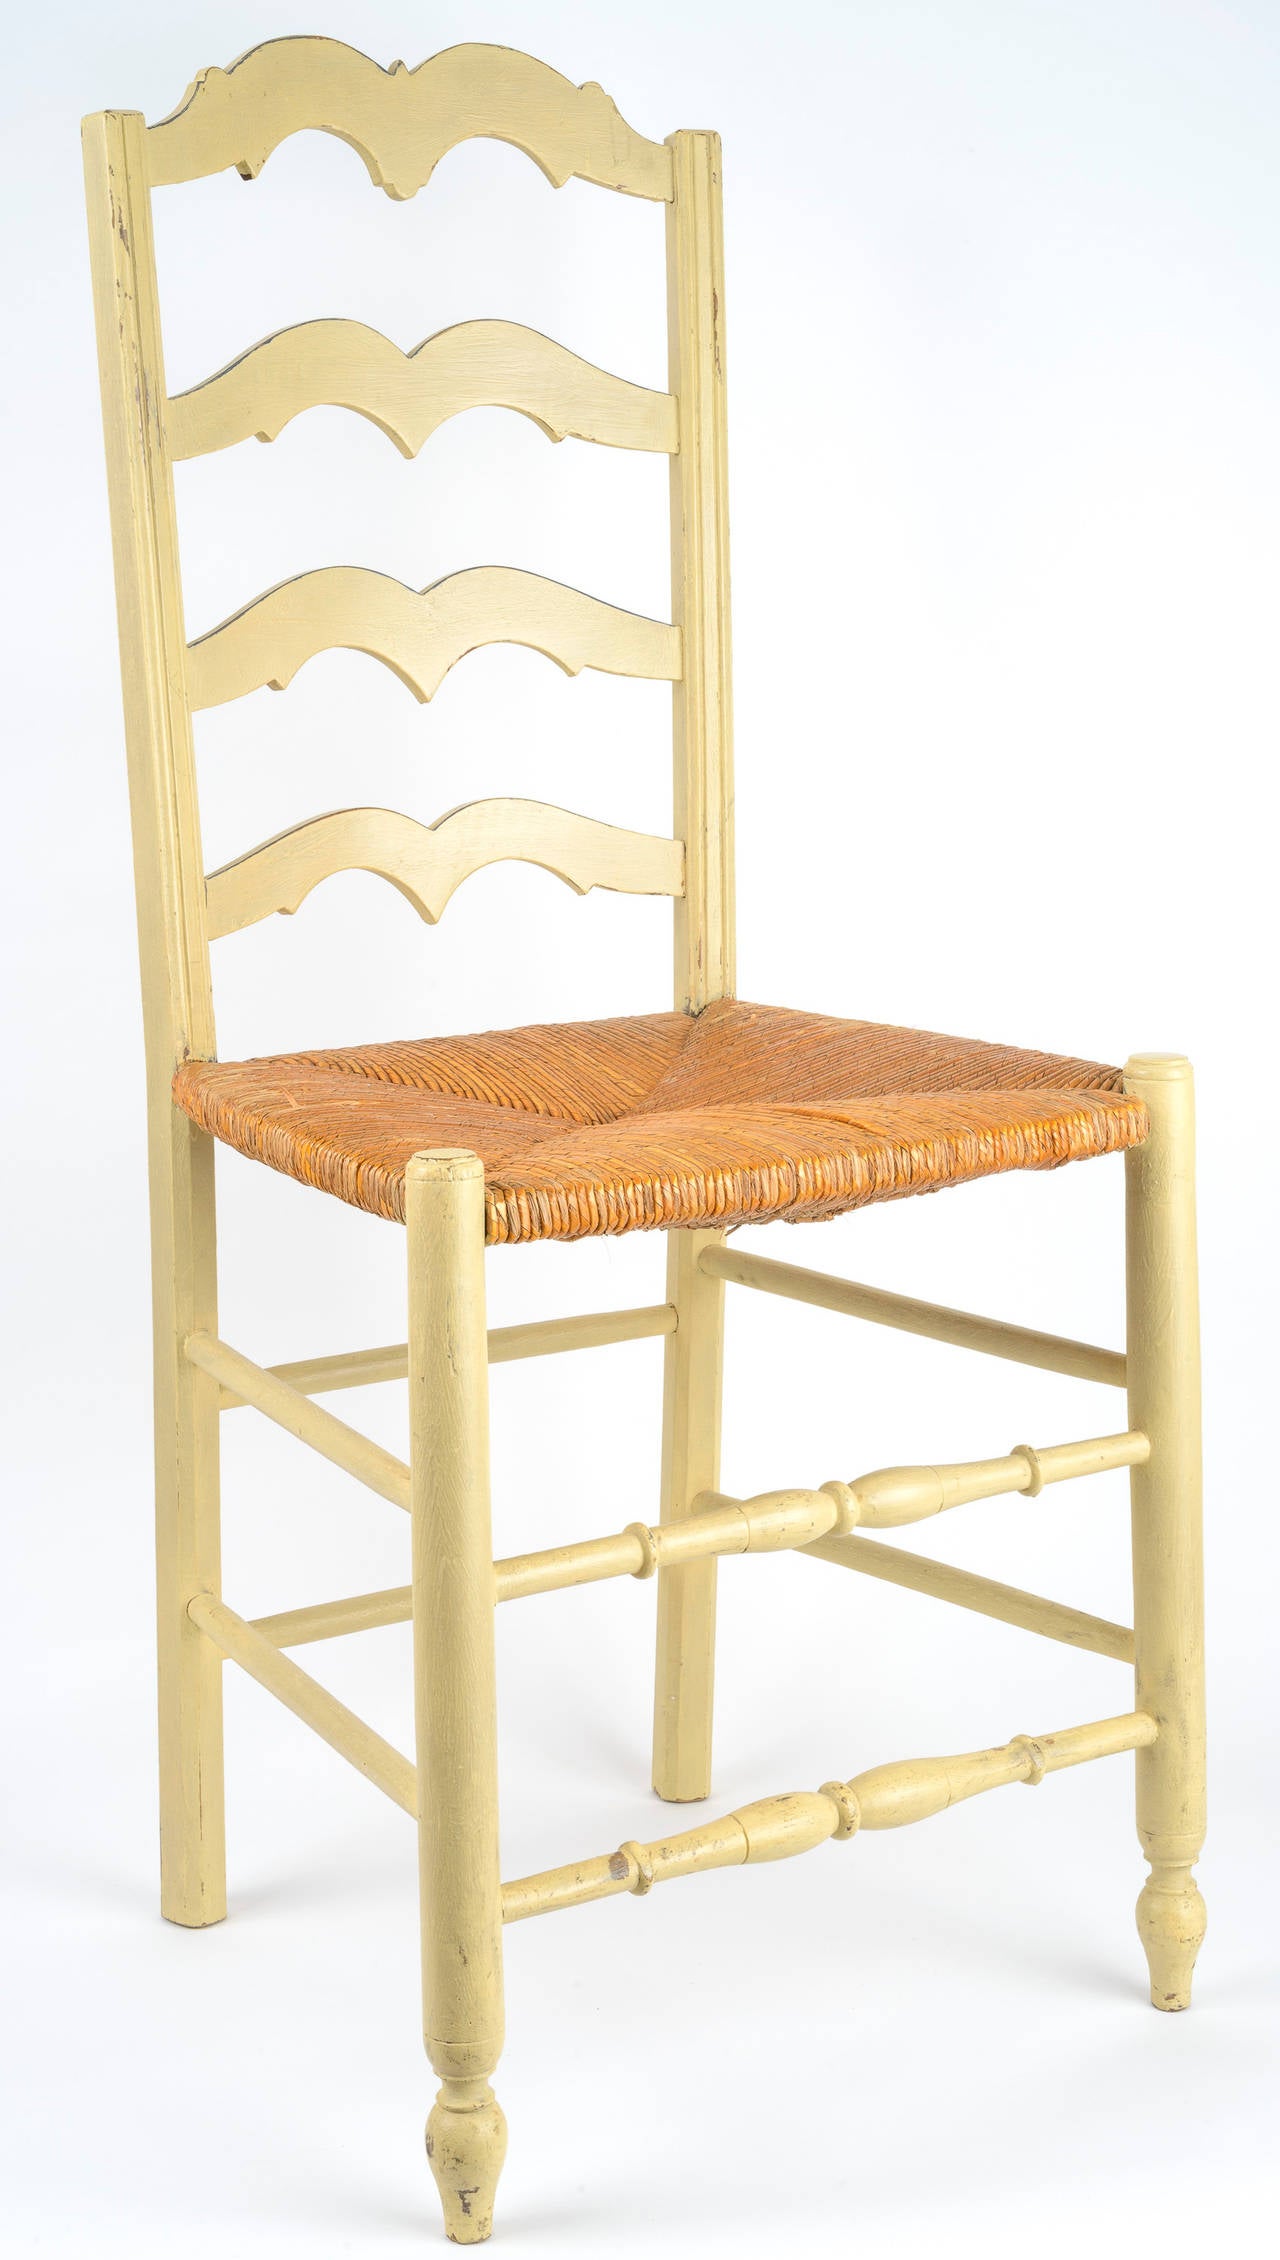 Set of eight painted ladder back chairs with rush seats. The ladder back slats are shaped with double arches and the vertical posts of the chair back are channeled. The front legs and stretcher are turned. The rush seats are original.
New paint.